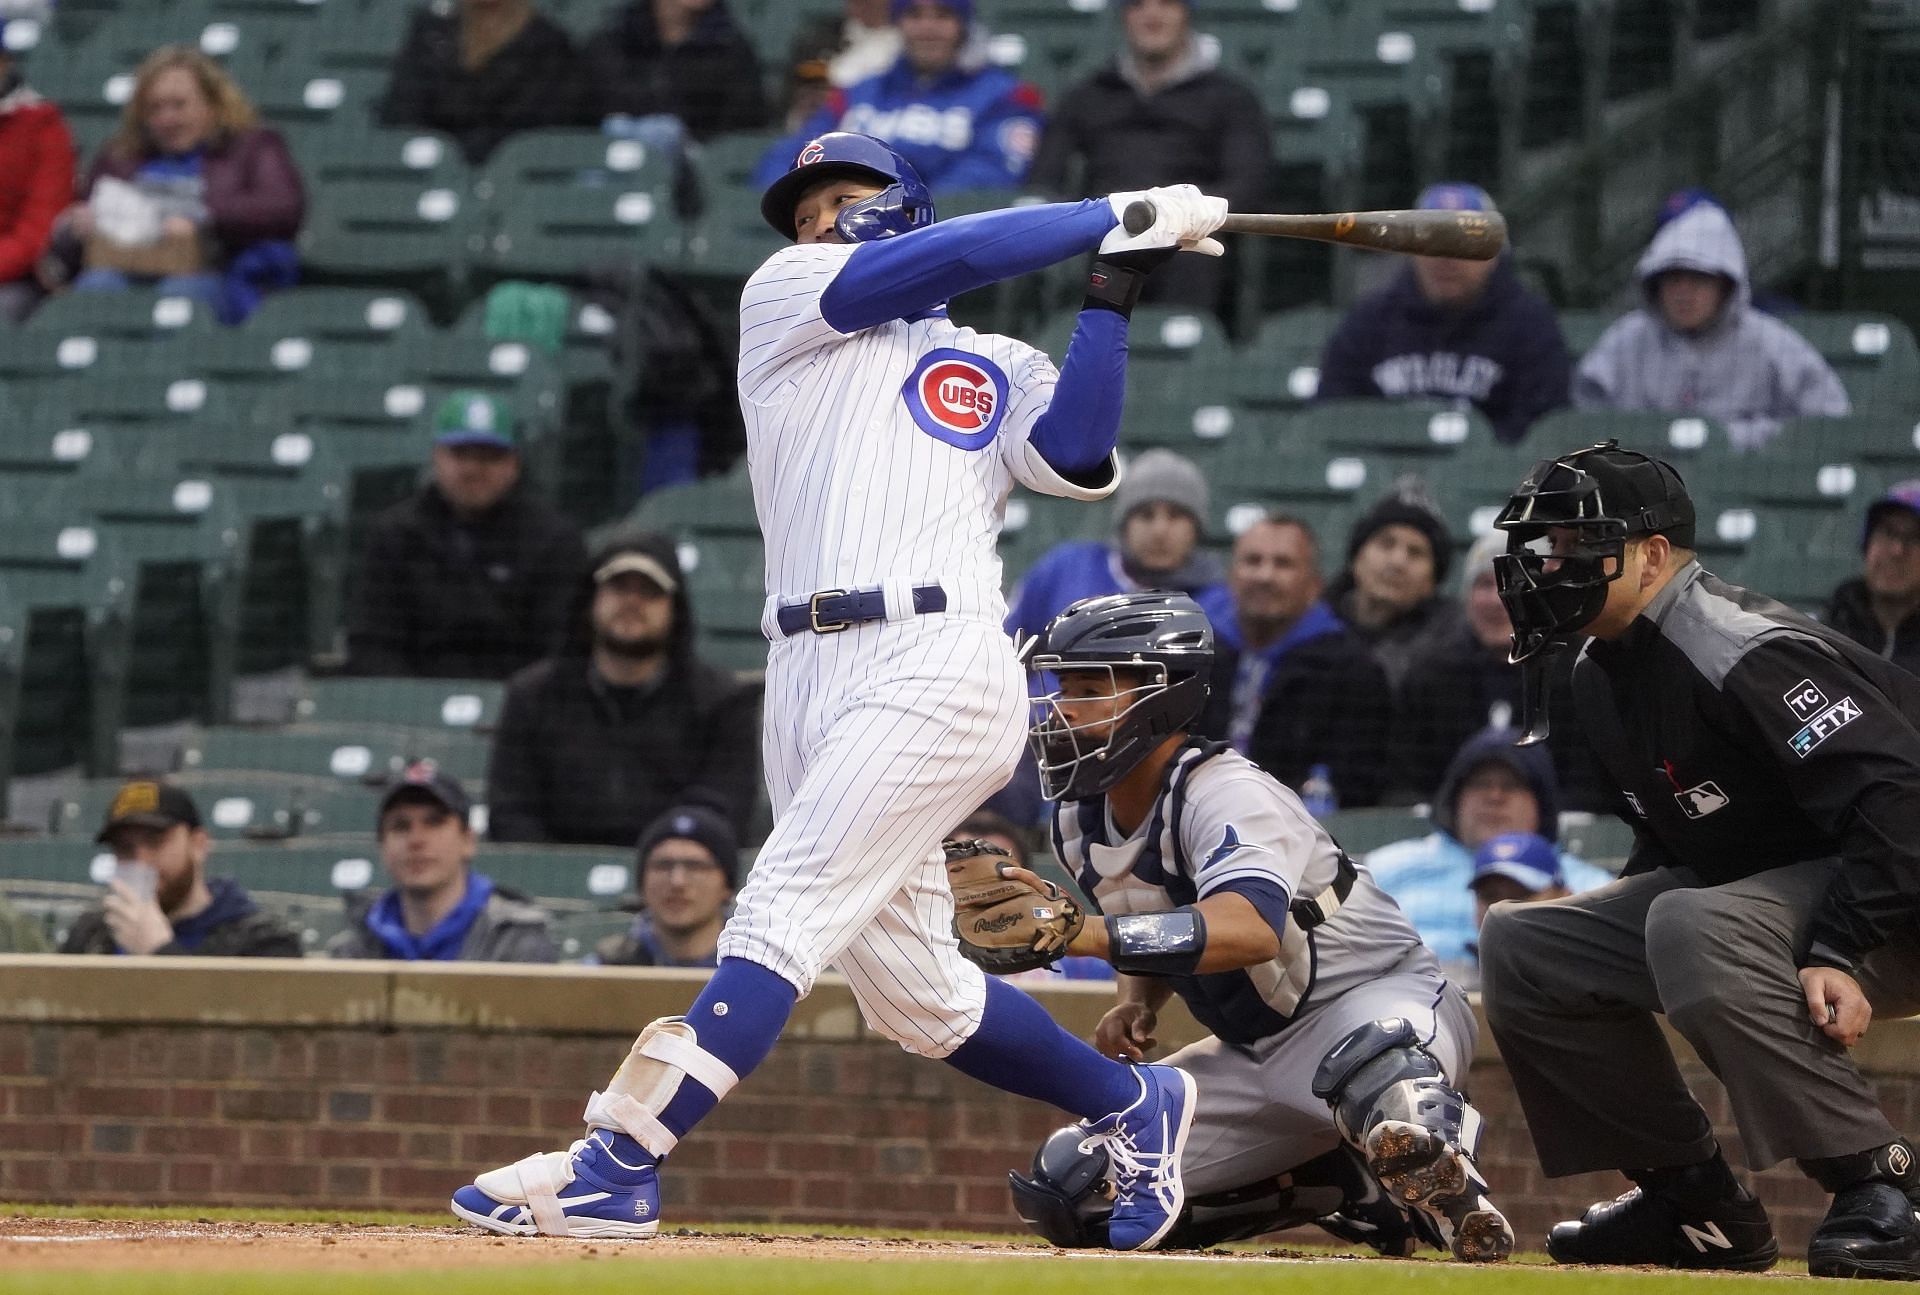 Rookie Seiya Suzuki of the Cubs has gotten off to a great start this year.